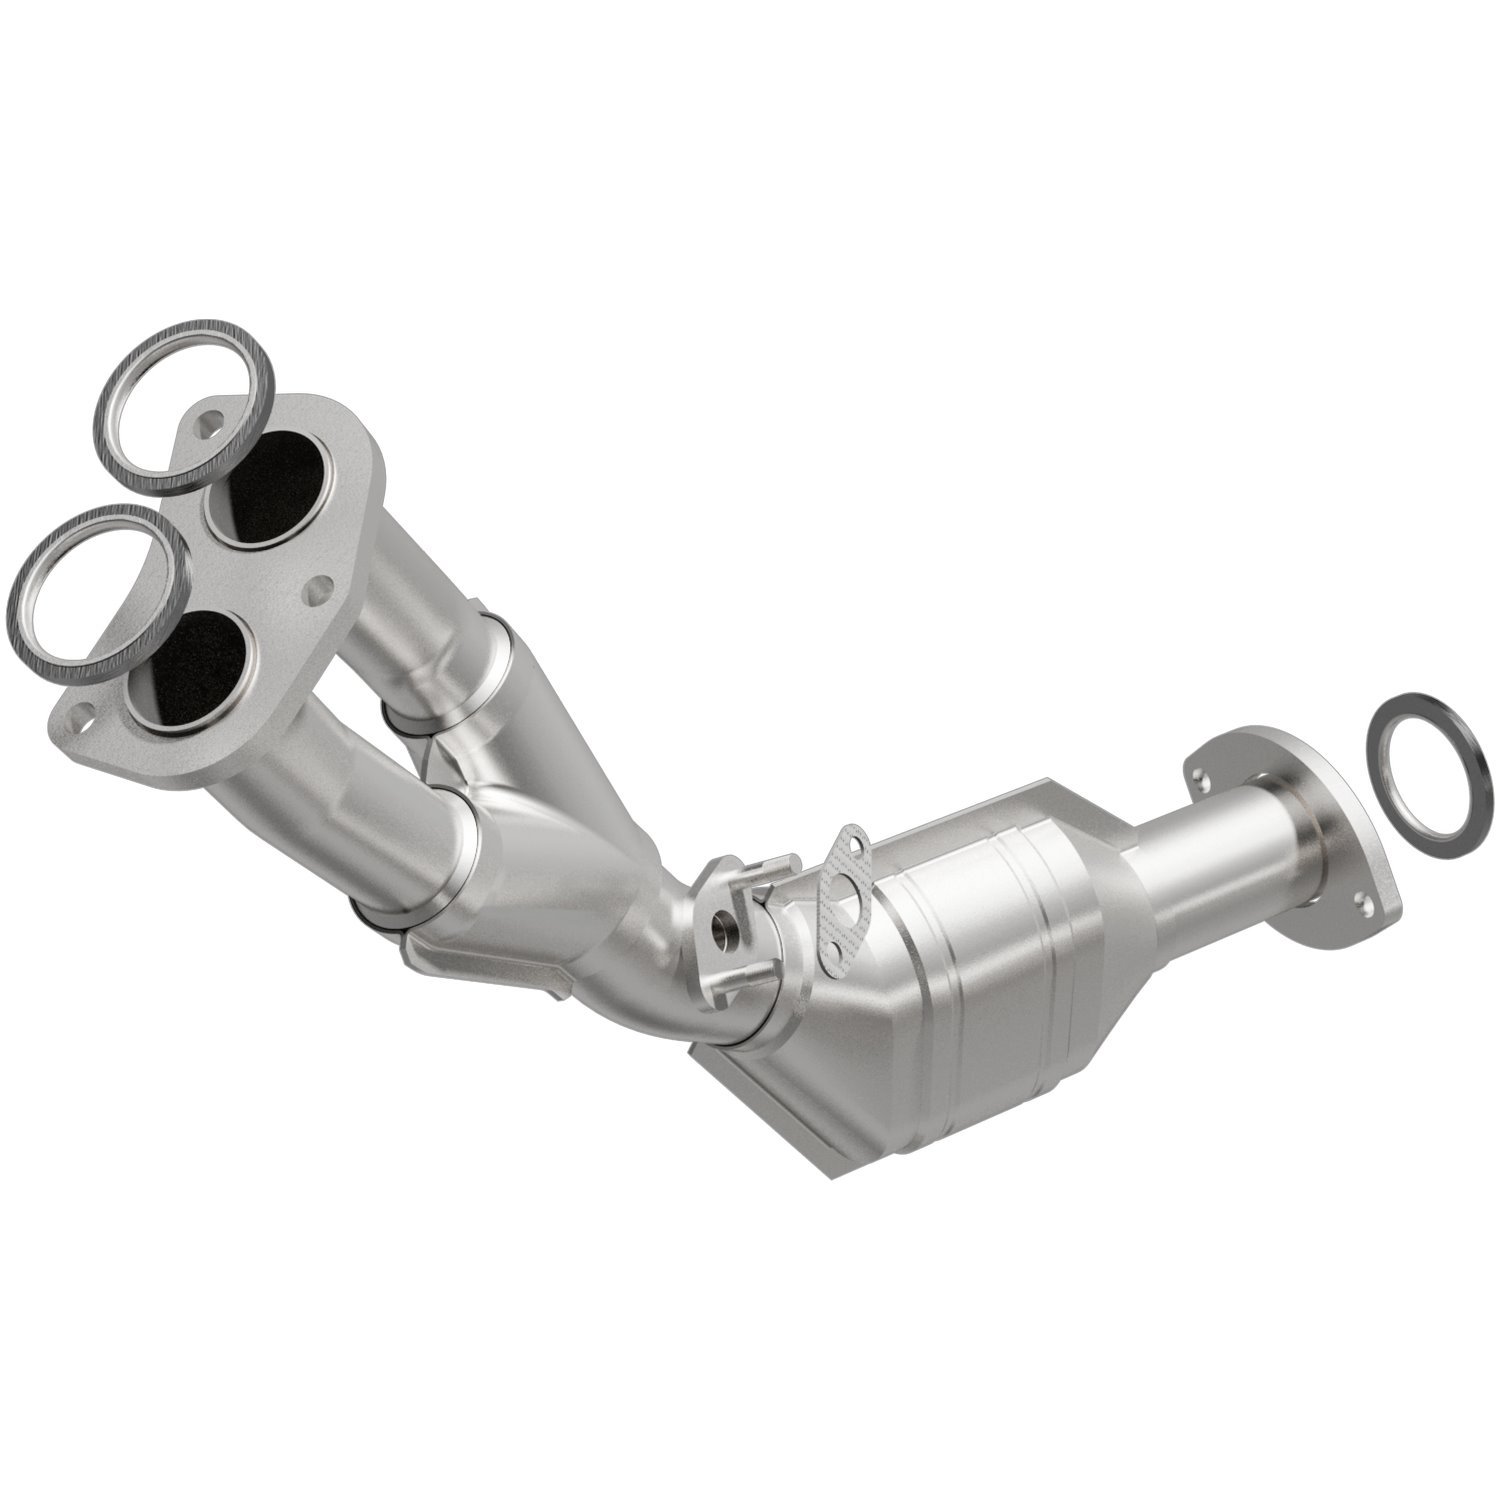 2000-2004 Toyota Tacoma HM Grade Federal / EPA Compliant Direct-Fit Catalytic Converter